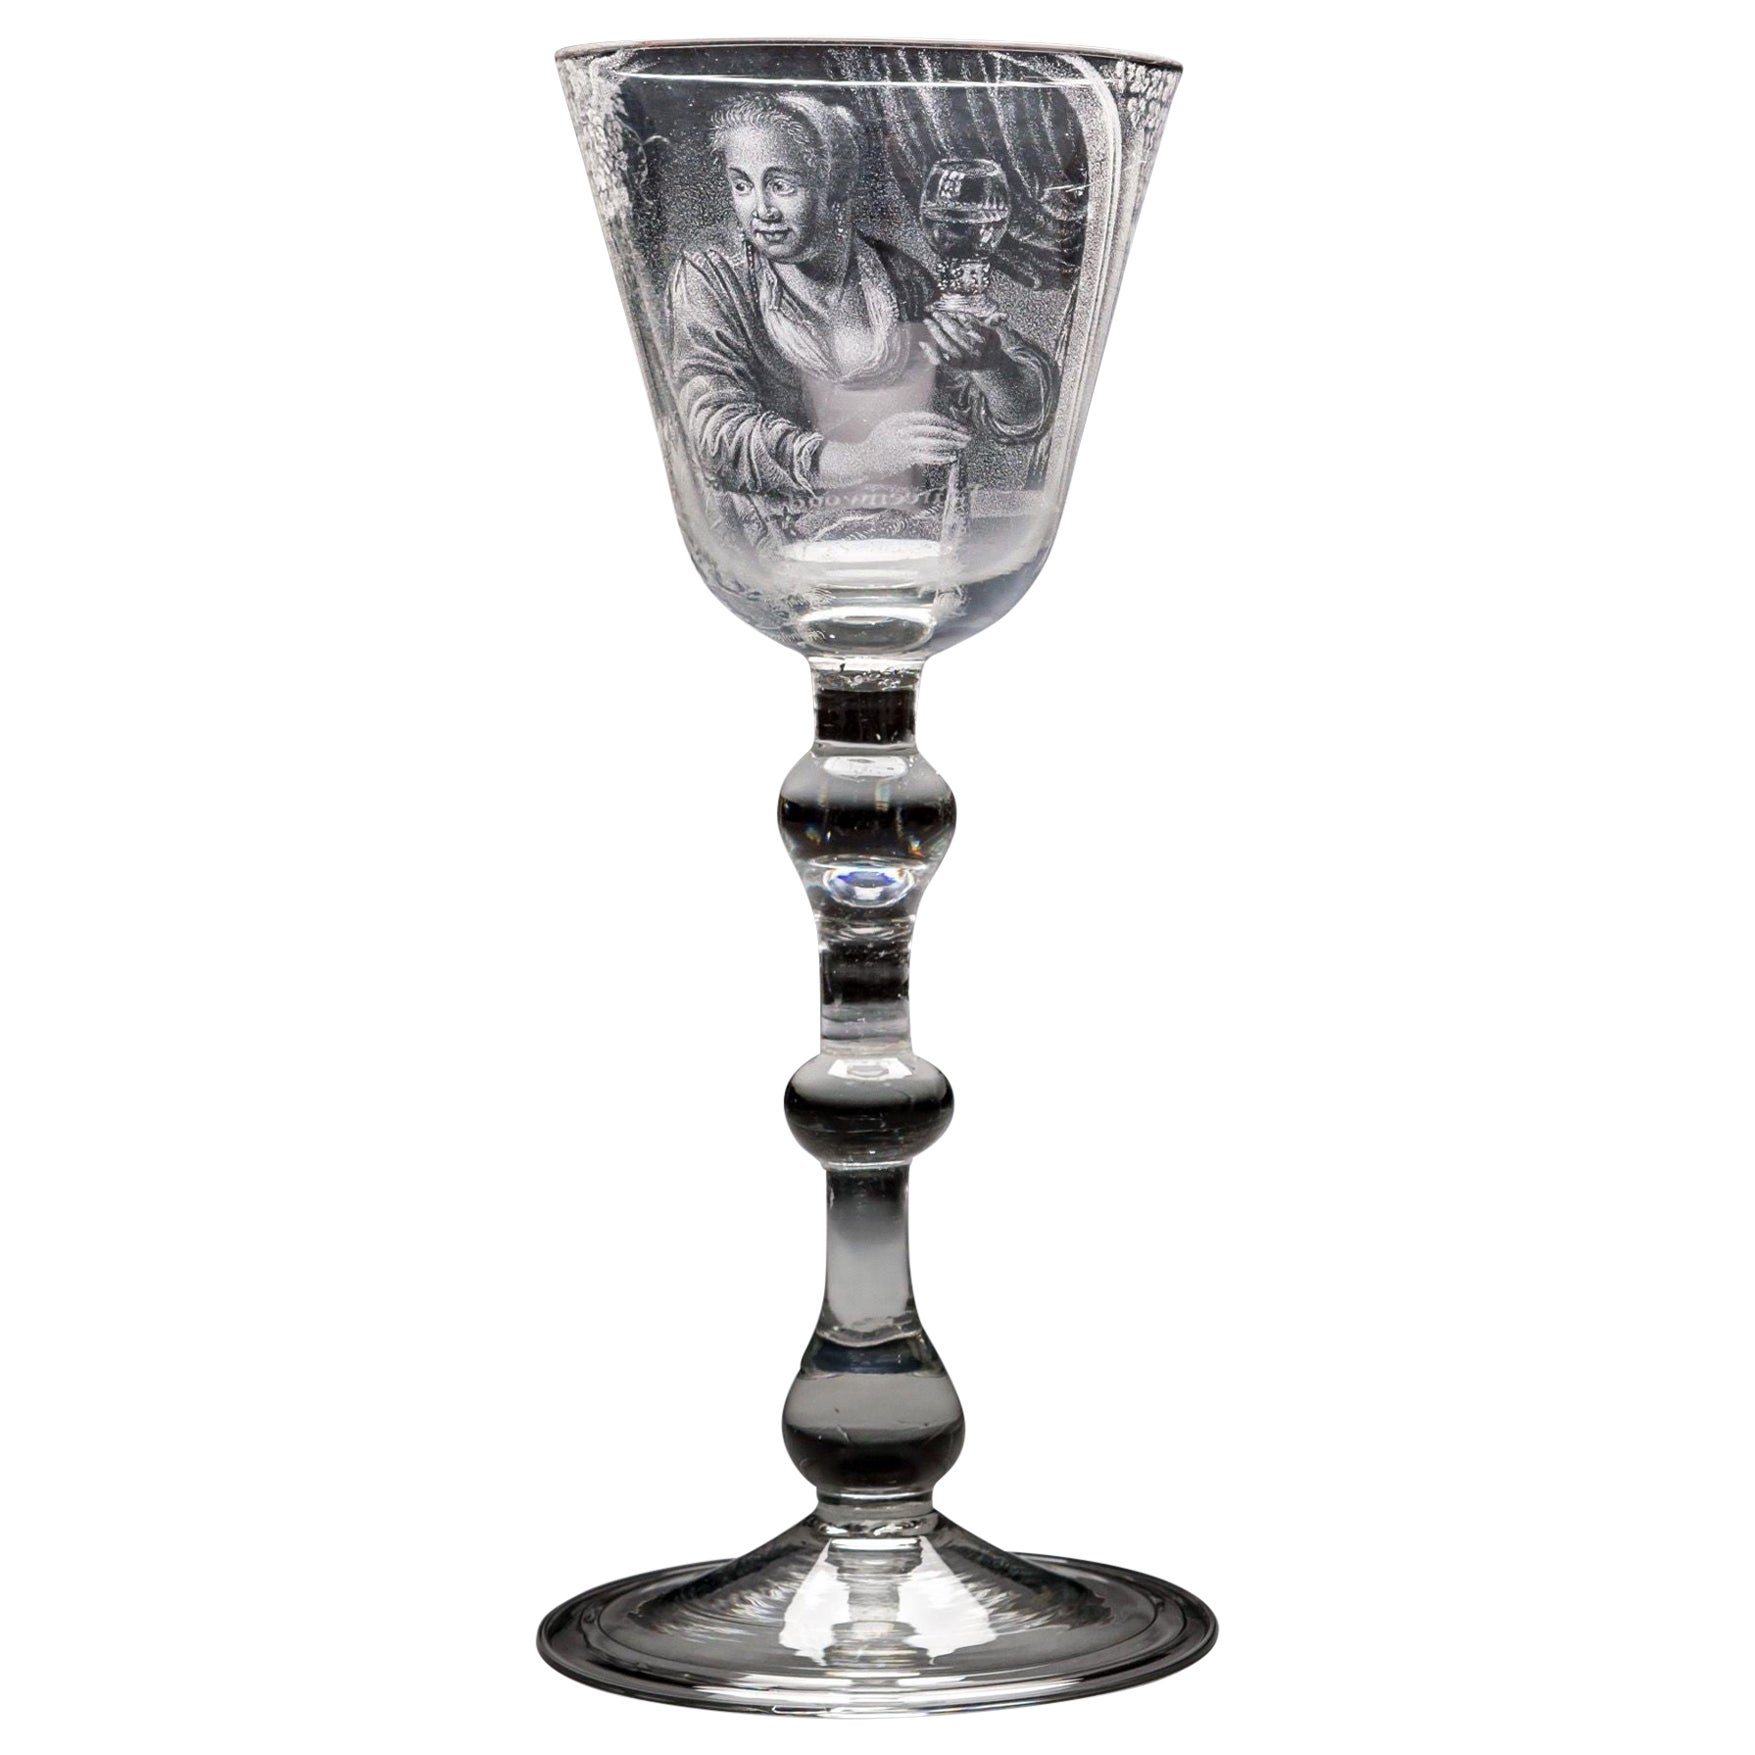 A Rare Documentary Stipple-Engraved Goblet Engraved By Frans Greenwood 